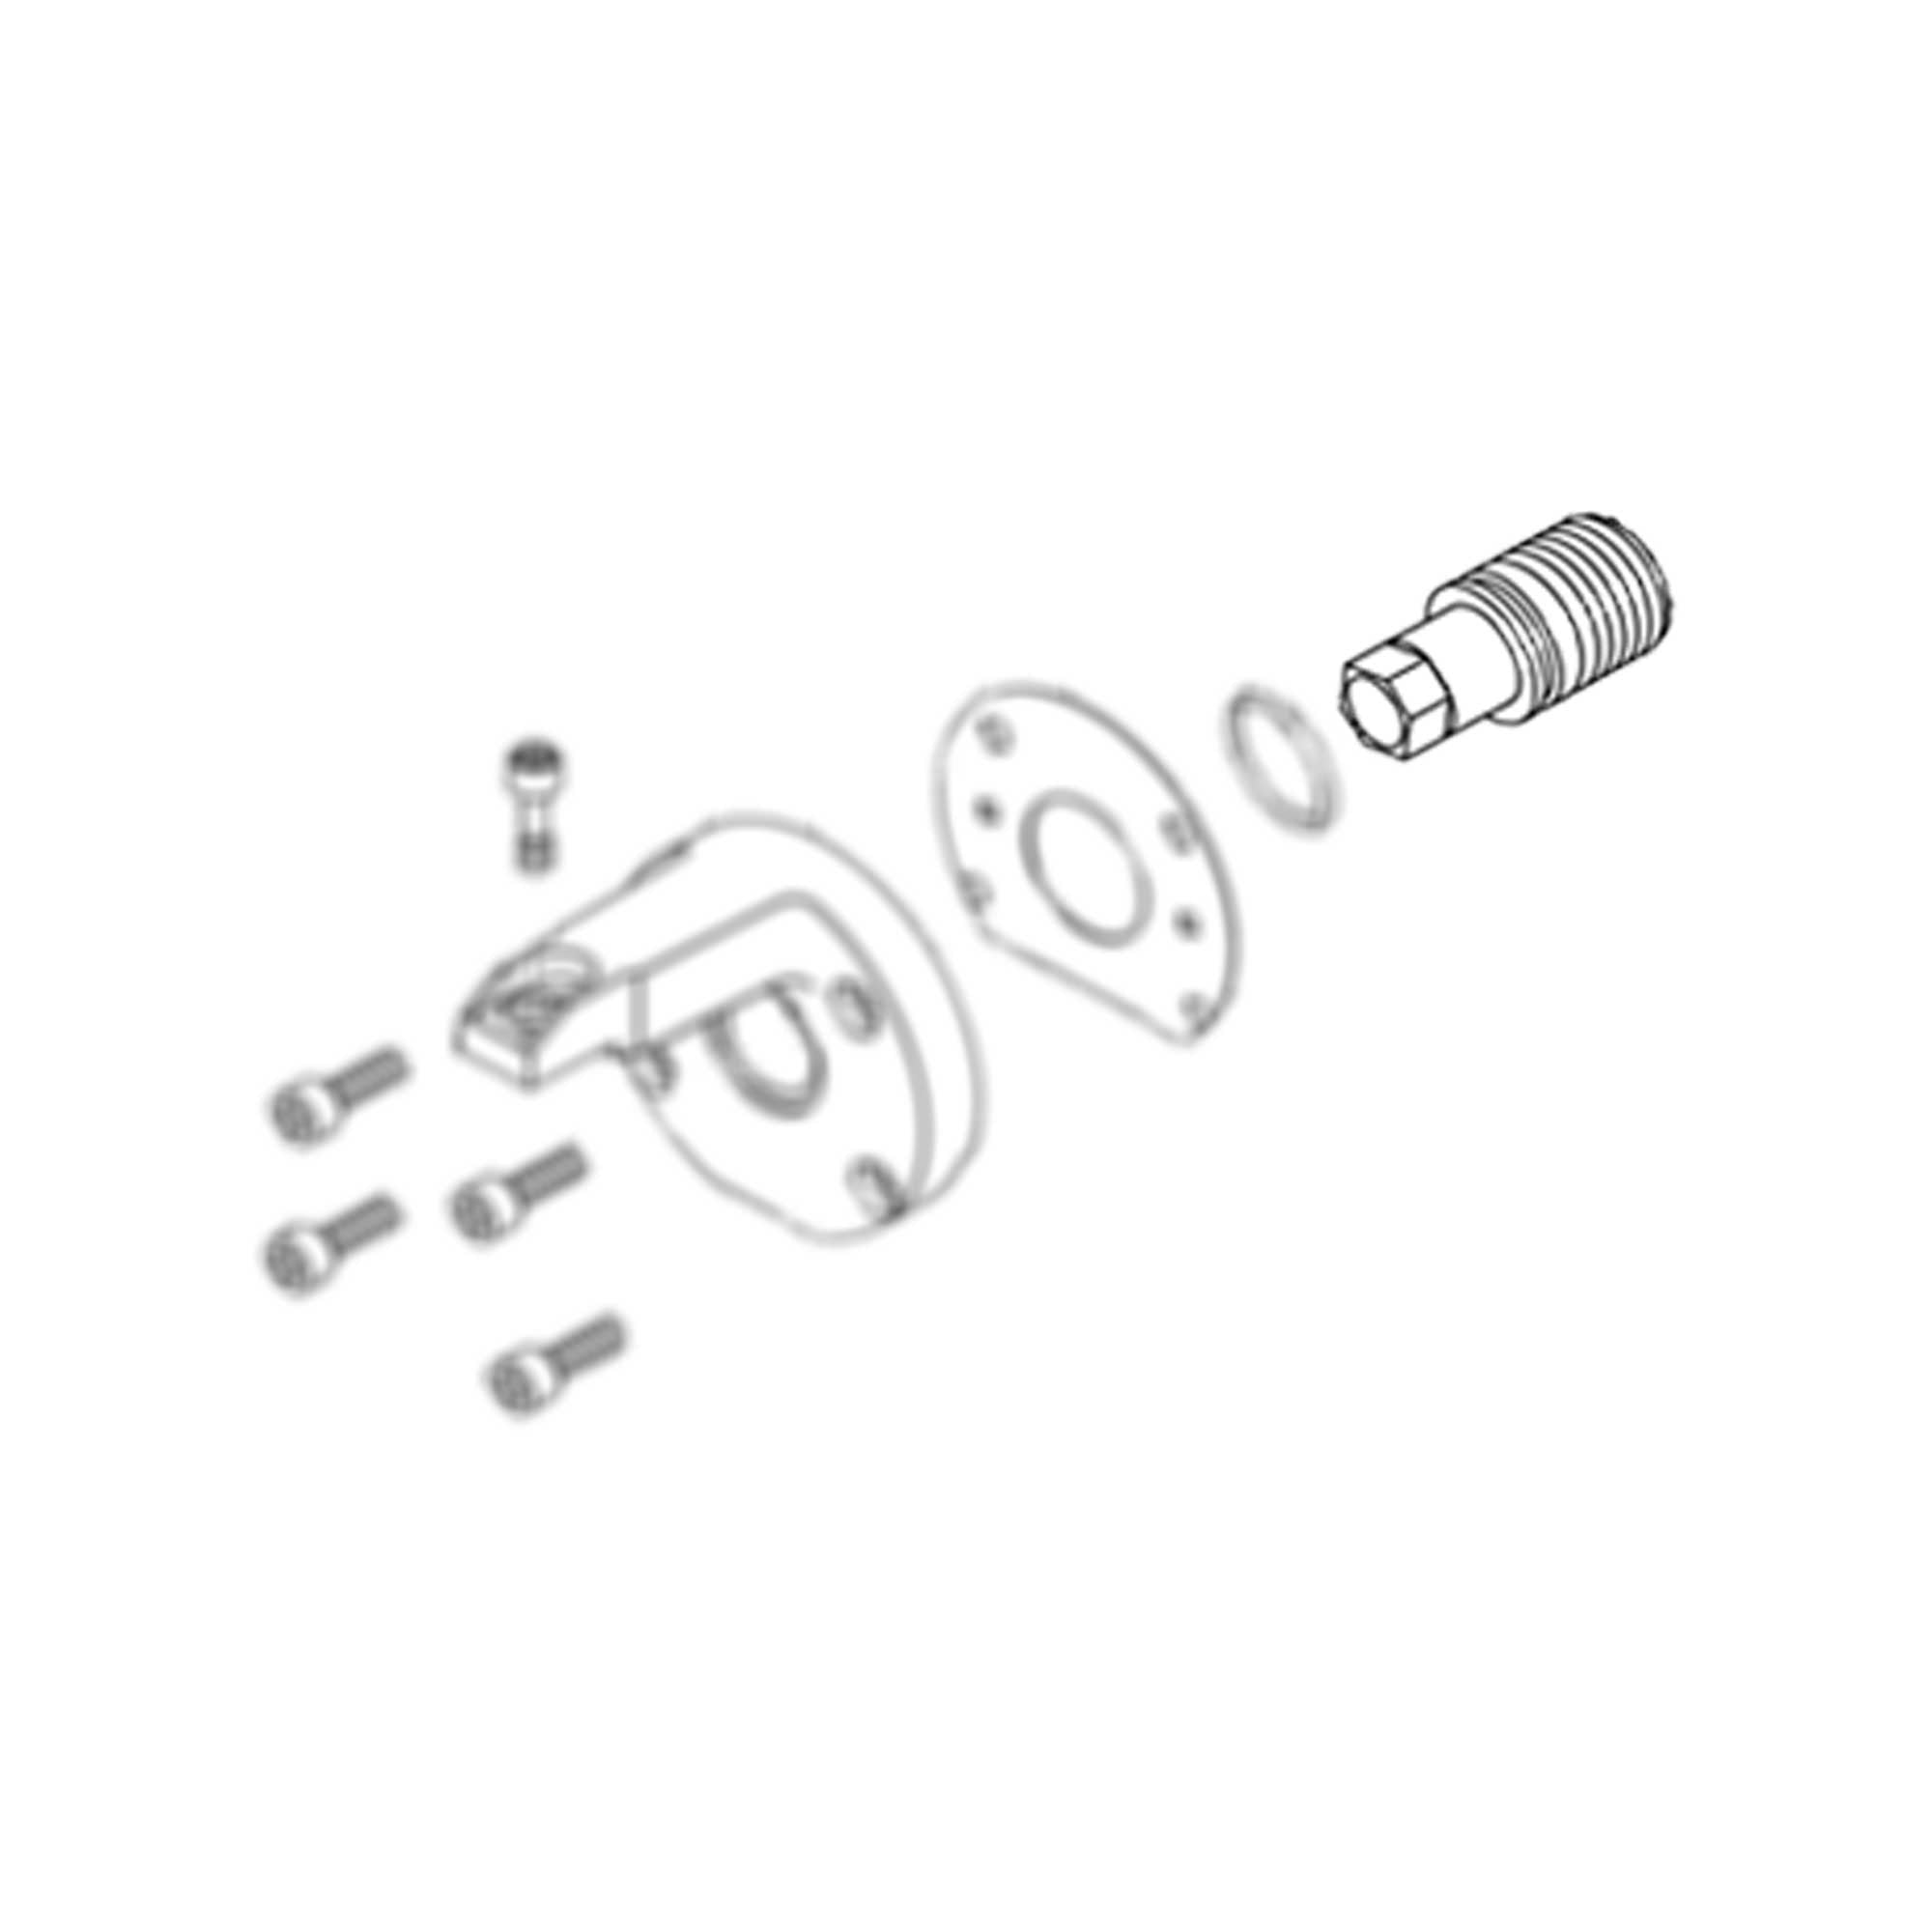 295663 - Front End Cylinder Stop - PURspray